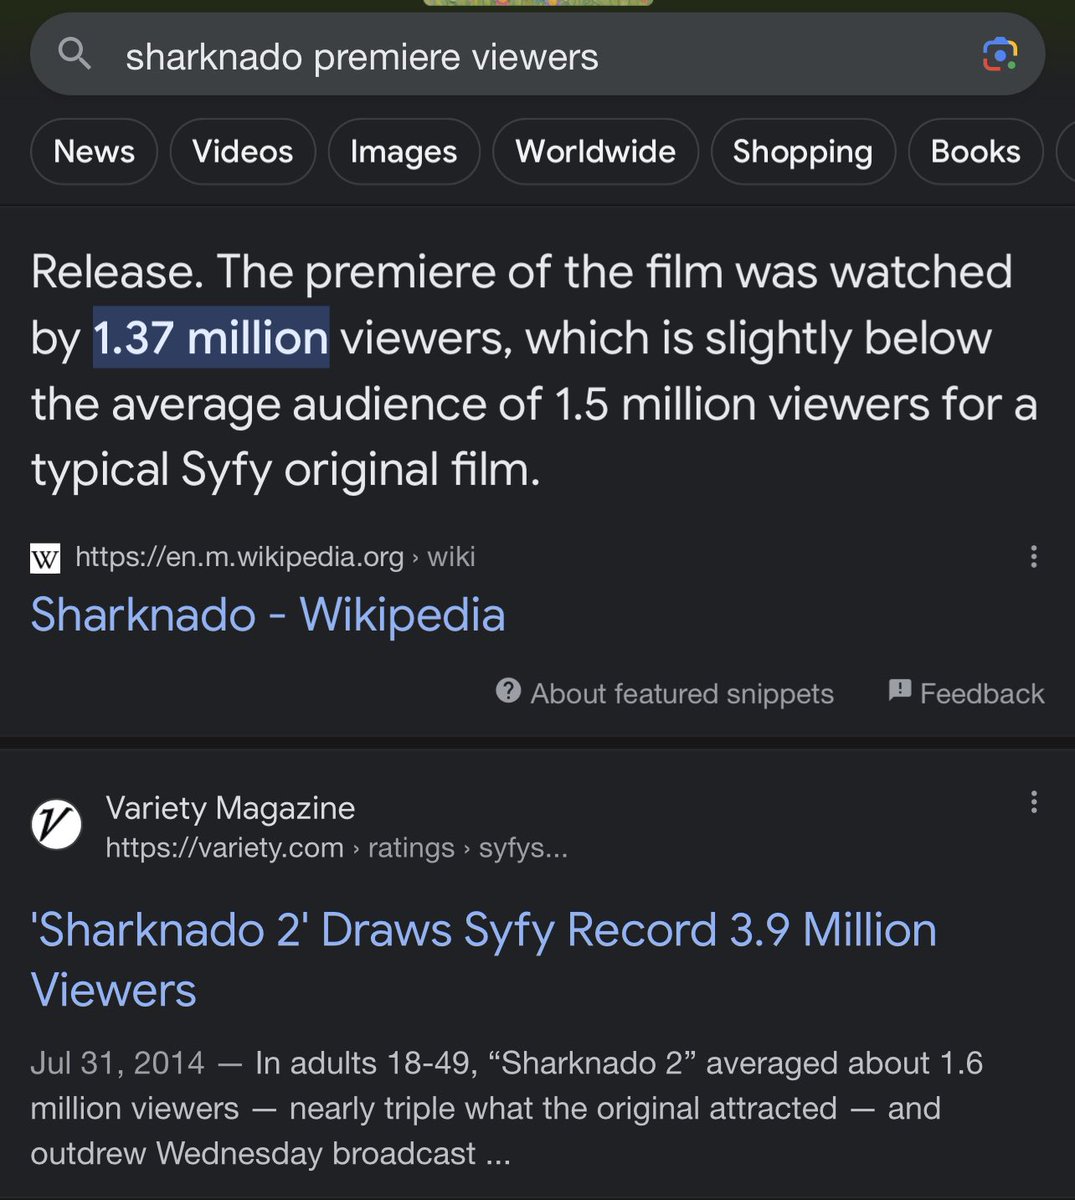 the sharknado machine just doesn’t quit